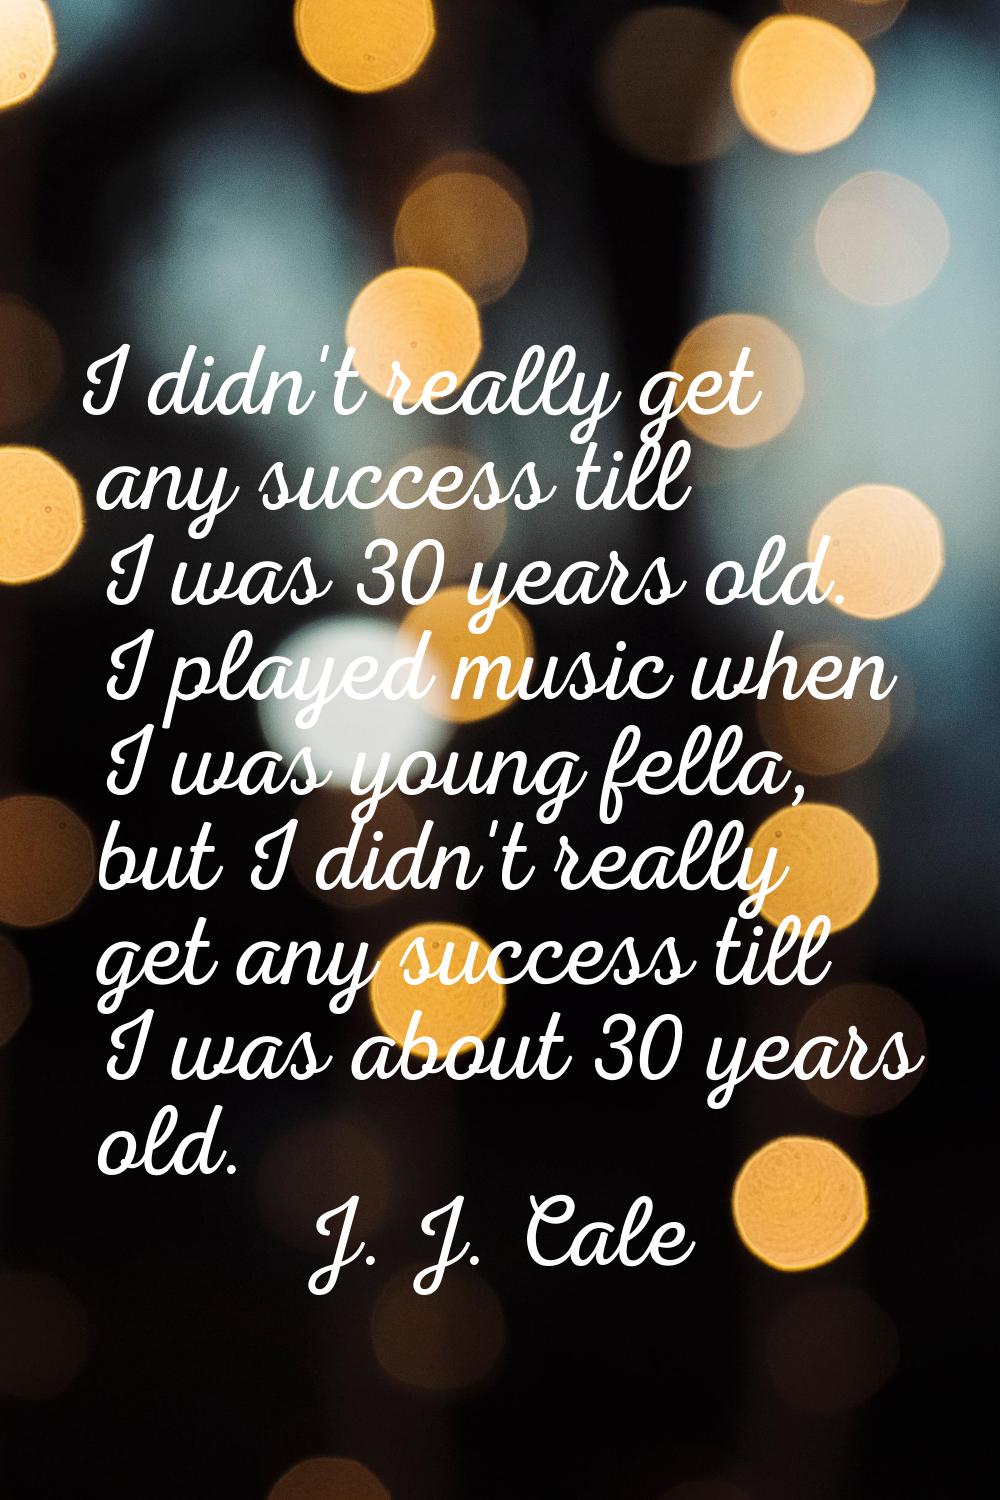 I didn't really get any success till I was 30 years old. I played music when I was young fella, but